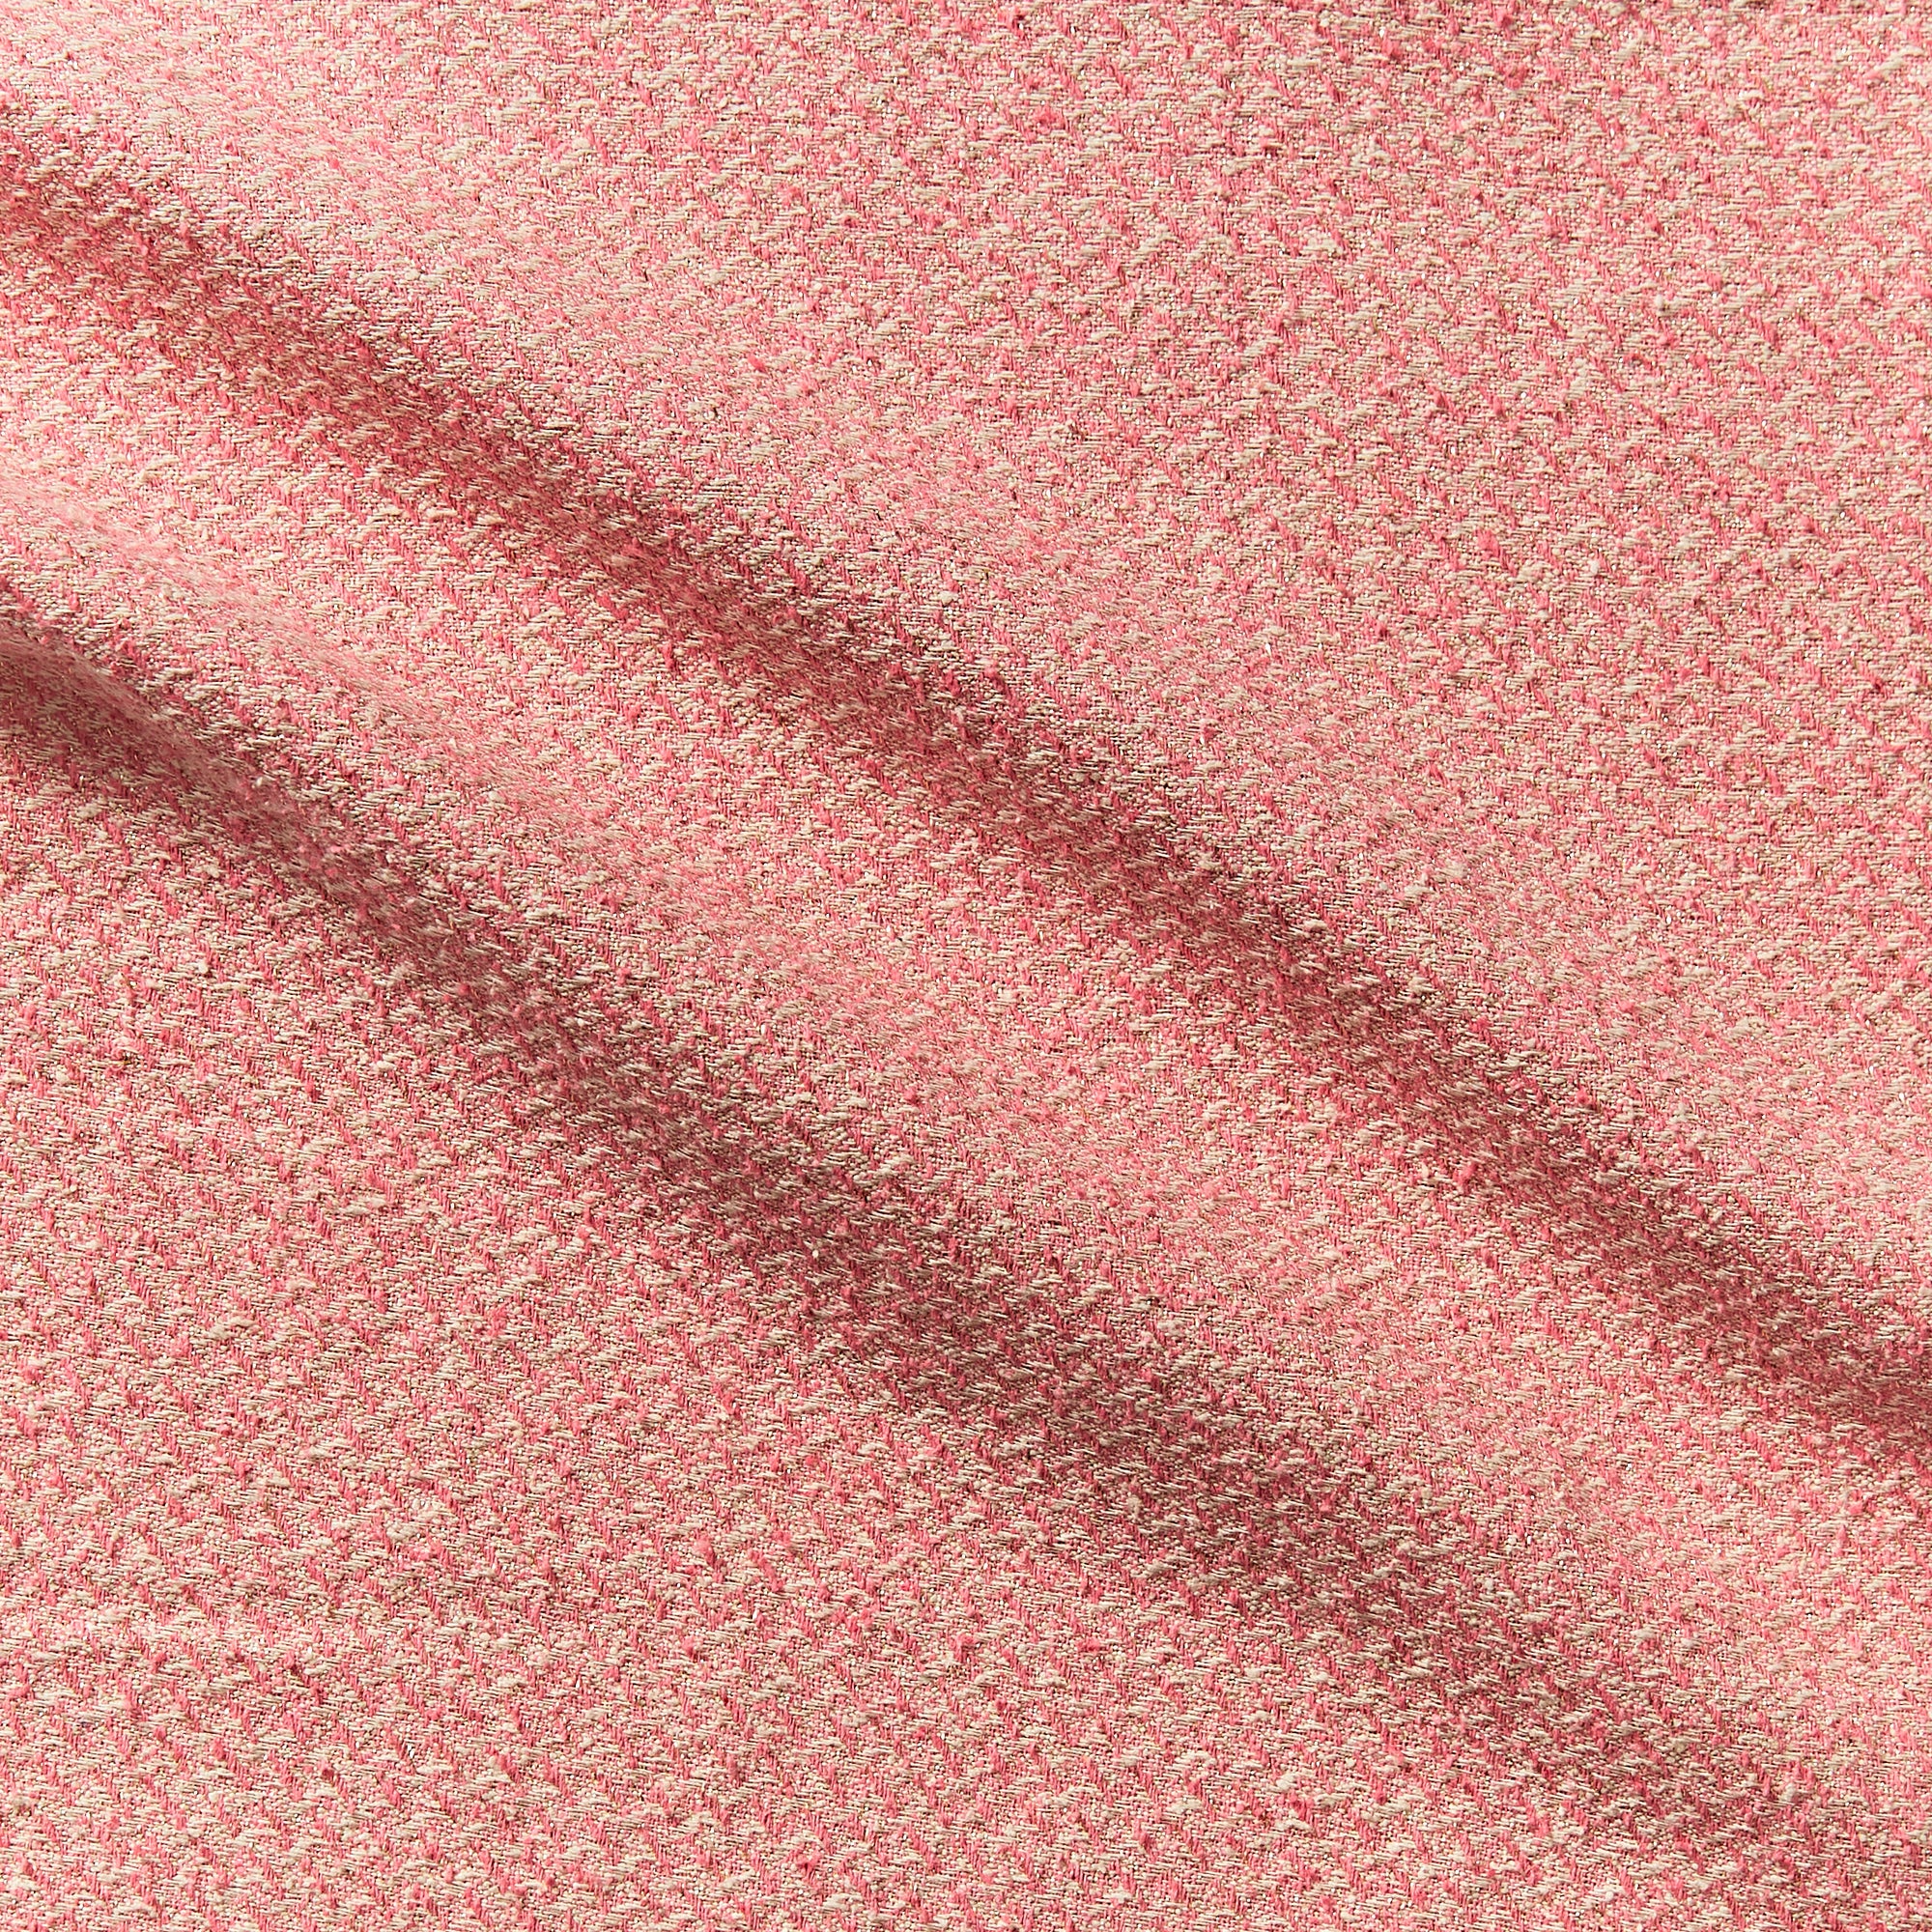 phoenix illustrating the coral color version of a textured tweed look yard dyed heavy weight pure silk with lurex highlights 